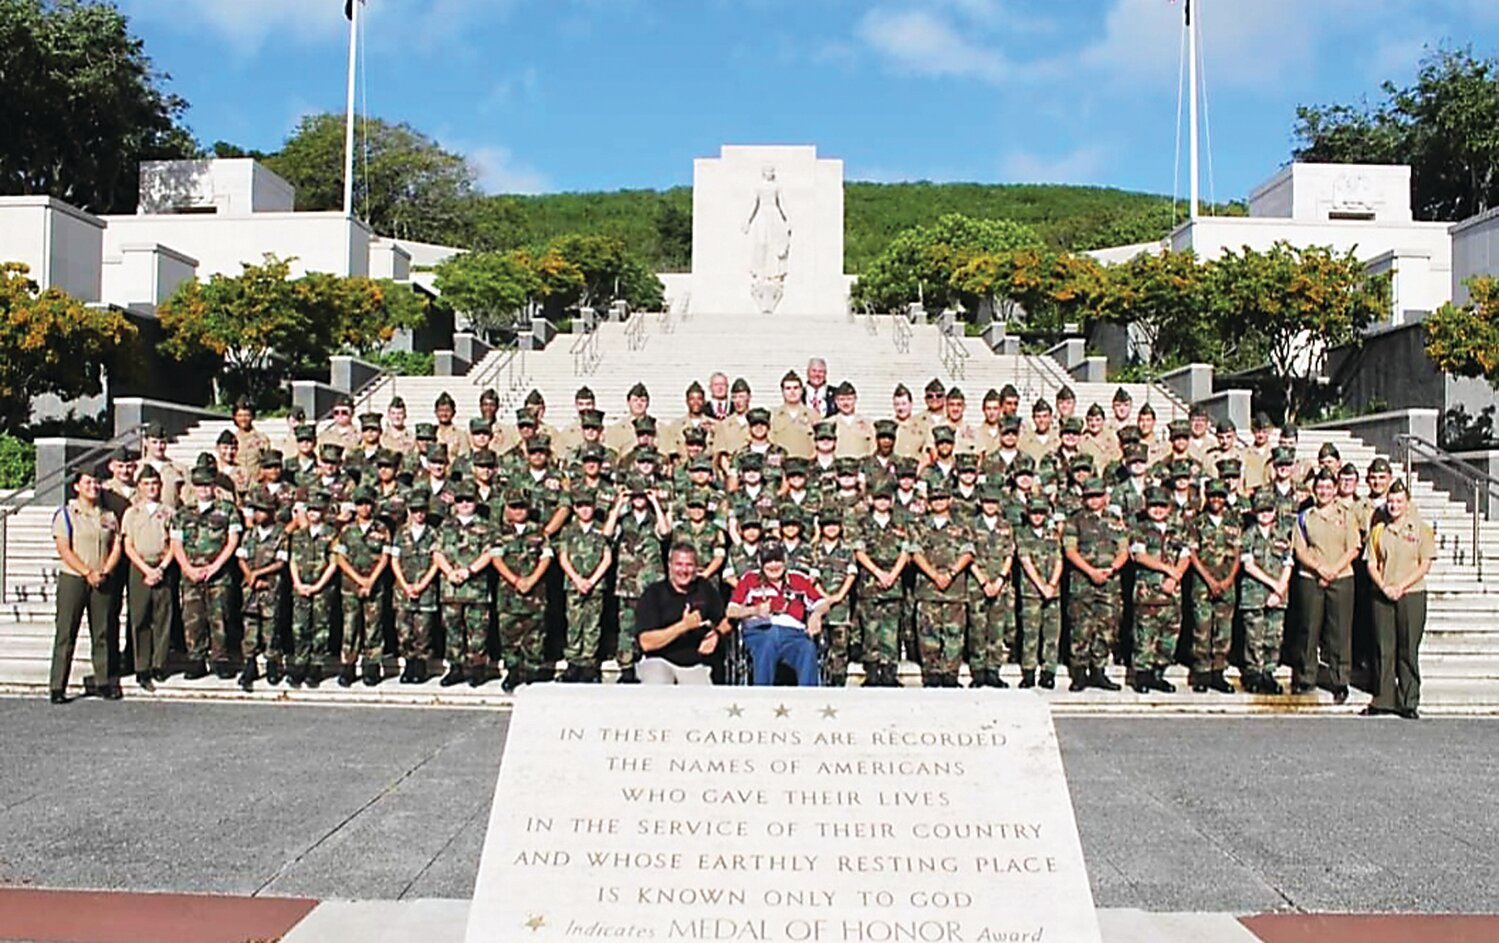 Twenty-eight Young Marine units from across the U.S. were in Hawaii for Pearl Harbor remembrance events. They had the honor of hosting a wreath-laying ceremony at the National Memorial Cemetery of the Pacific, a national cemetery located at the Punchbowl Crater in Honolulu.